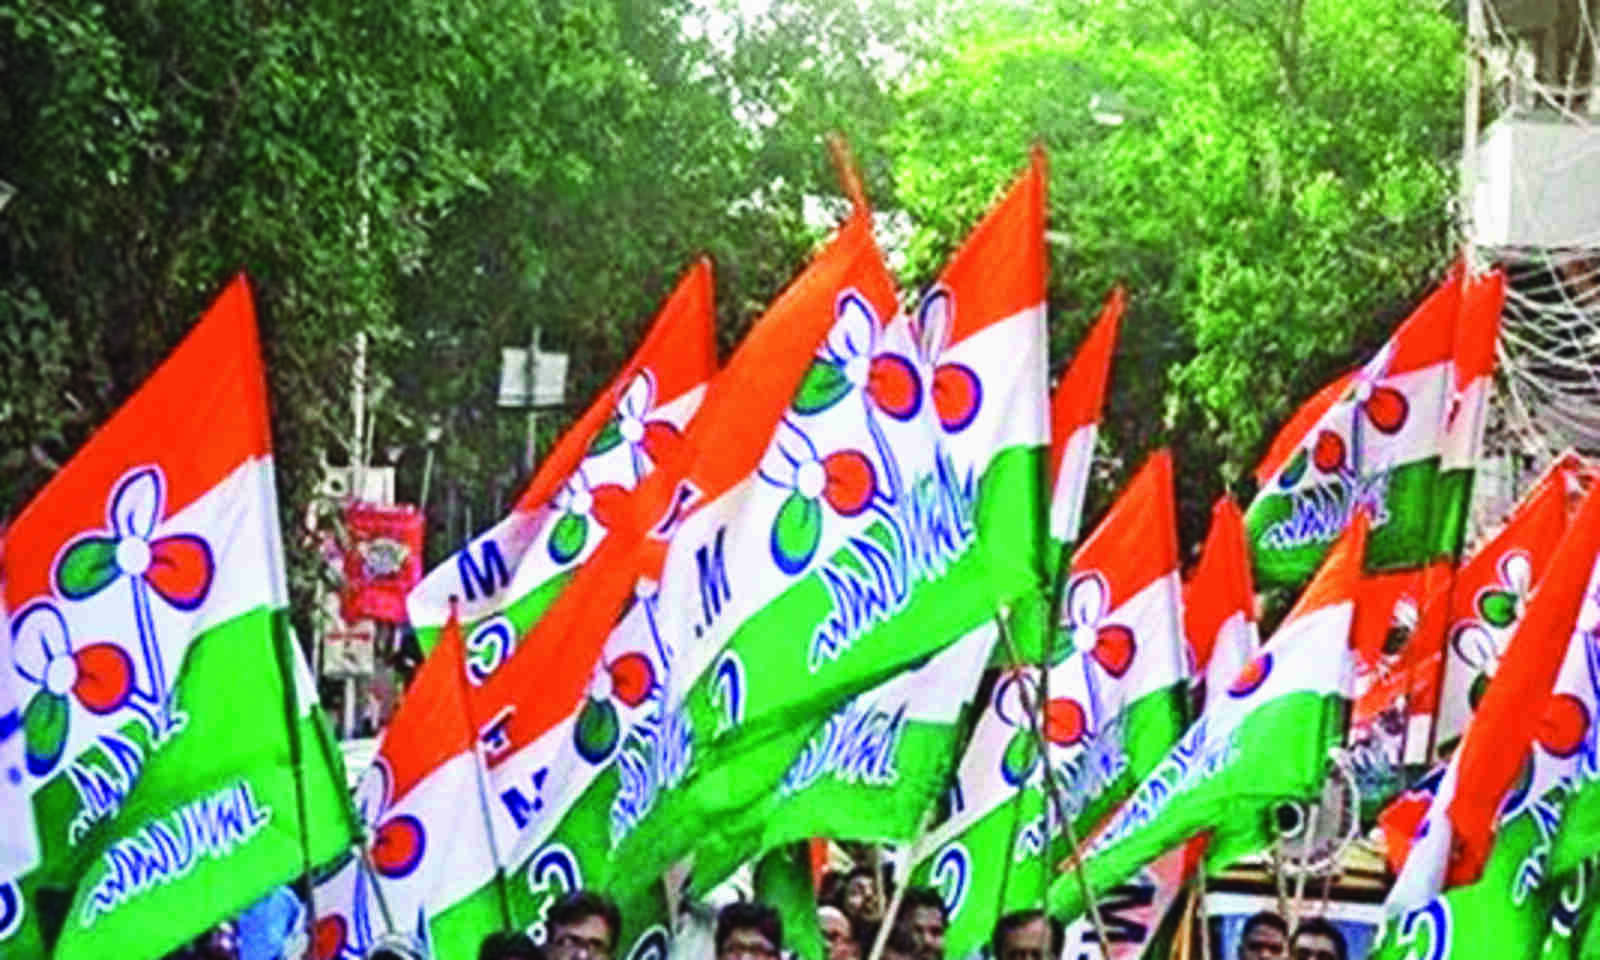 TMC sweeps co-op body poll in East Midnapore